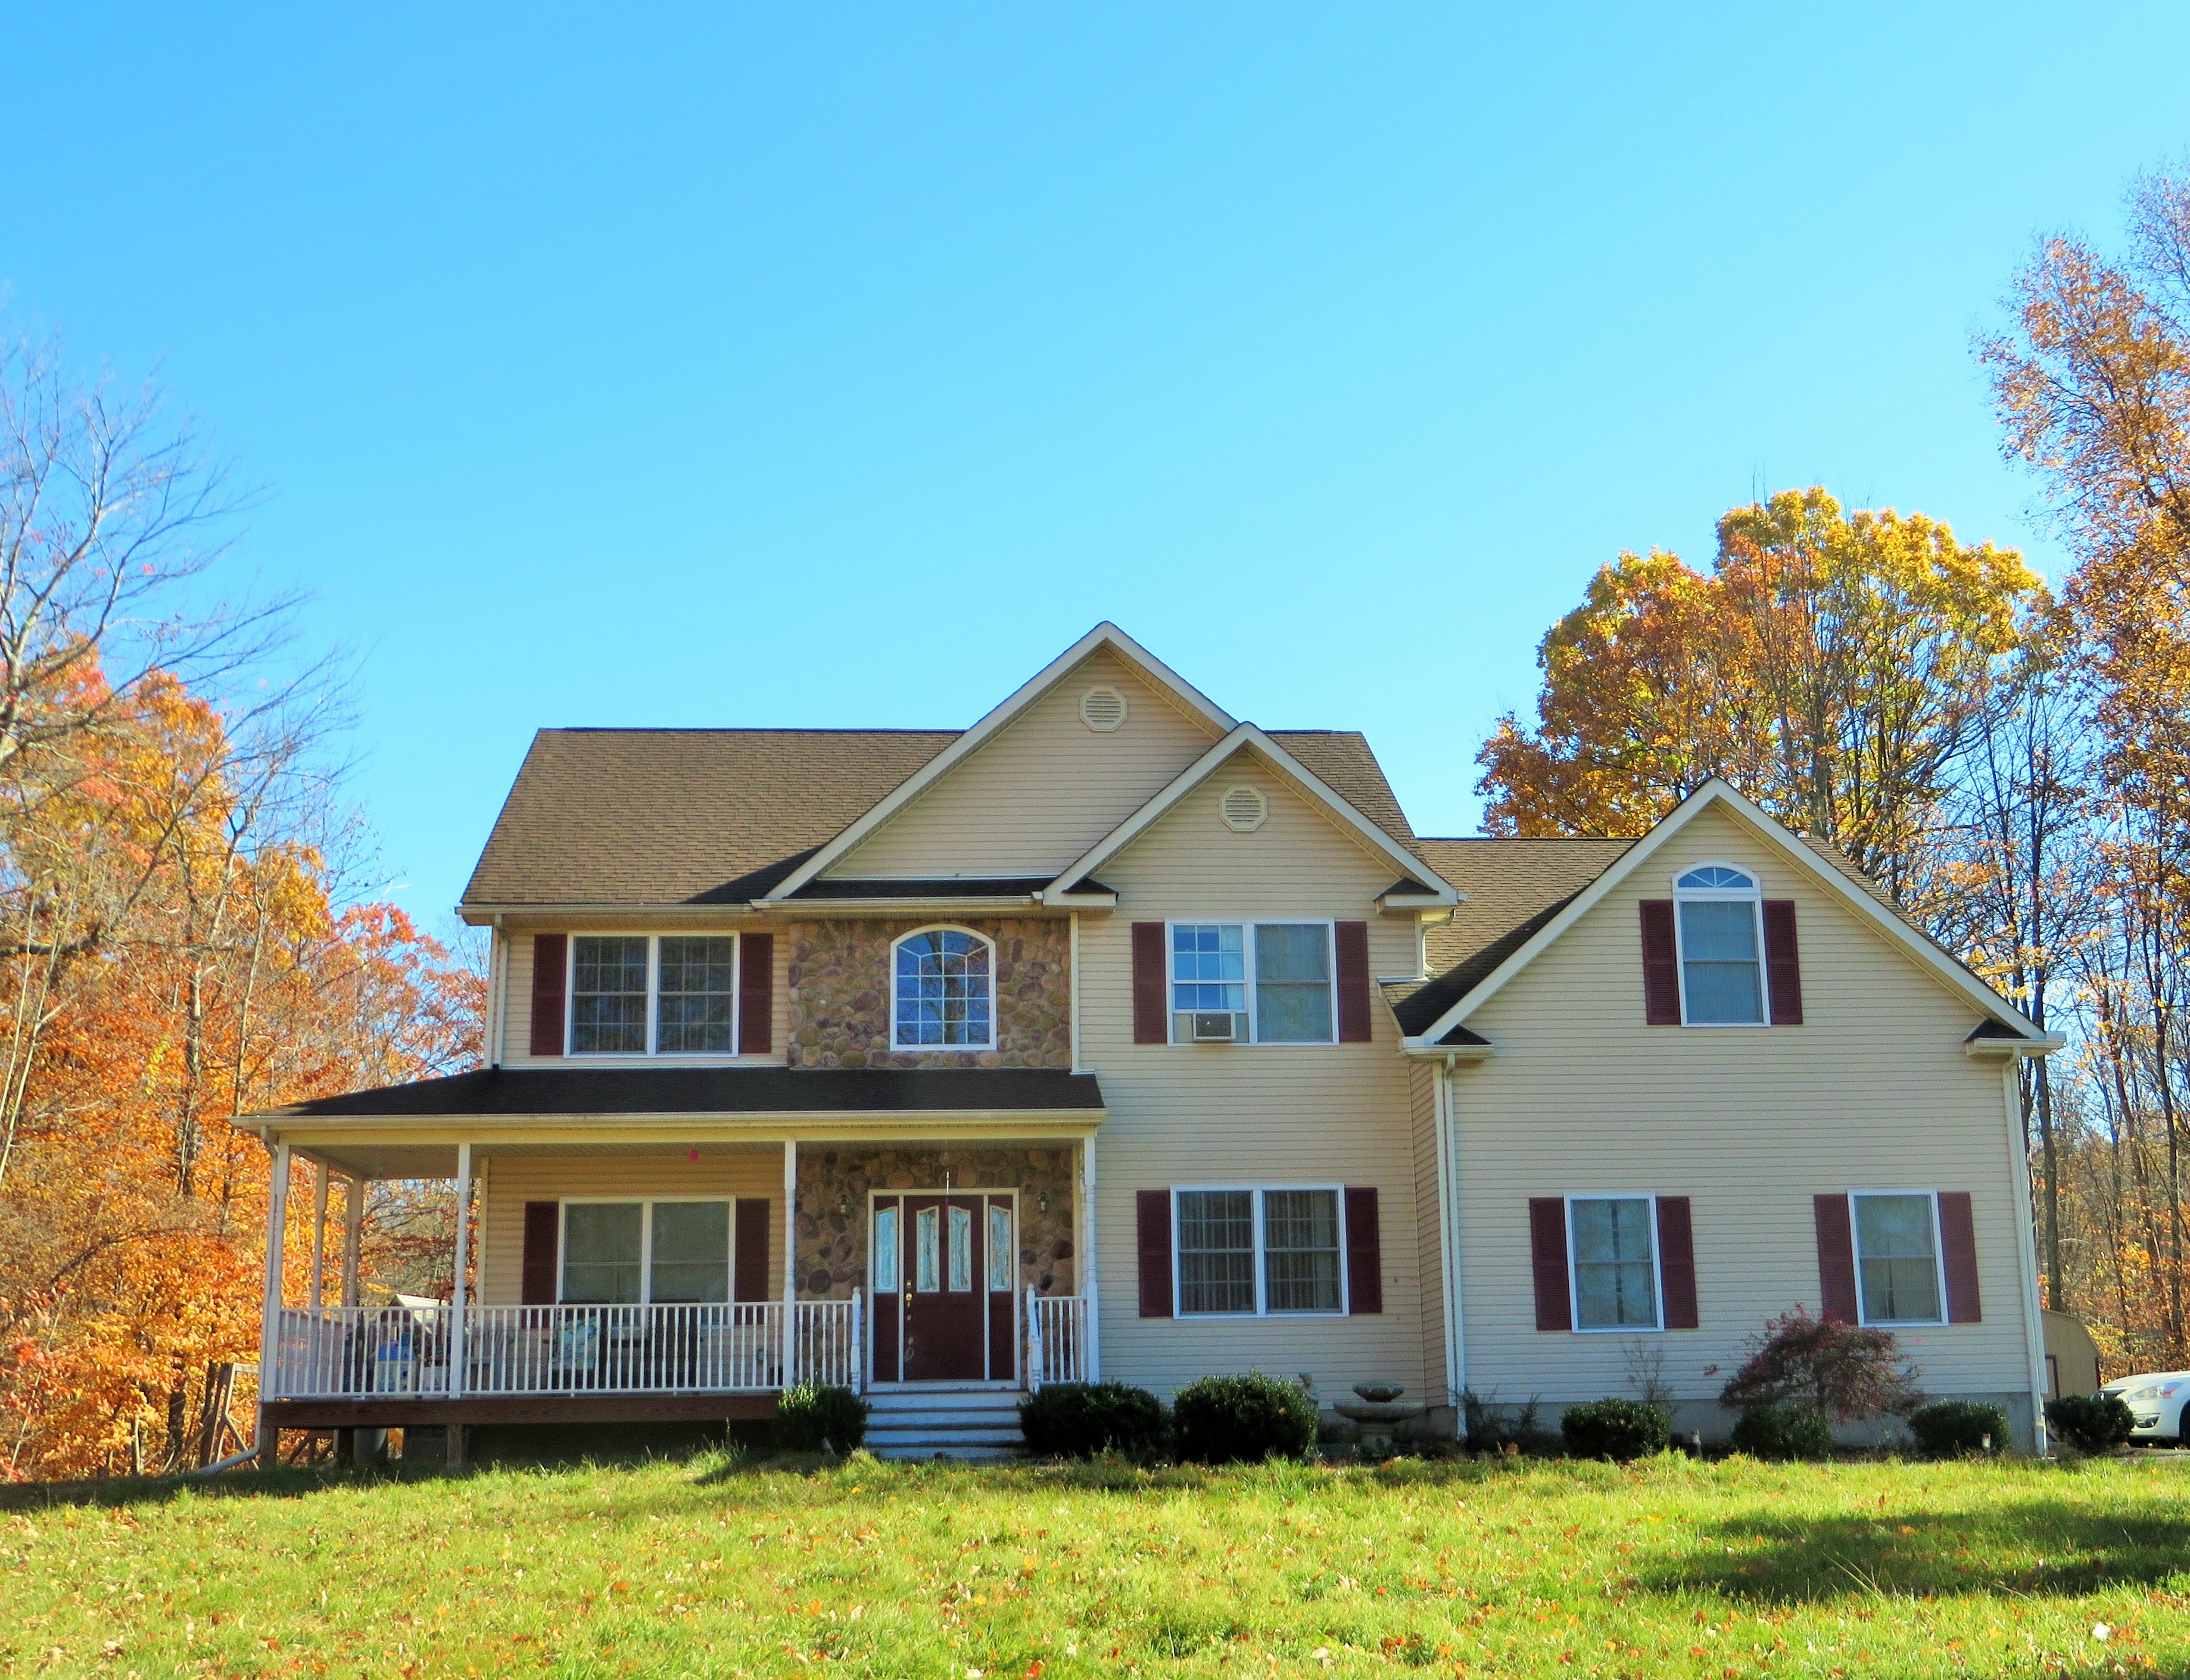 SOLD!! | 13 Jupiter Drive, Modena NY 12548 | Pristine Neighborhood in Lovely Country Setting